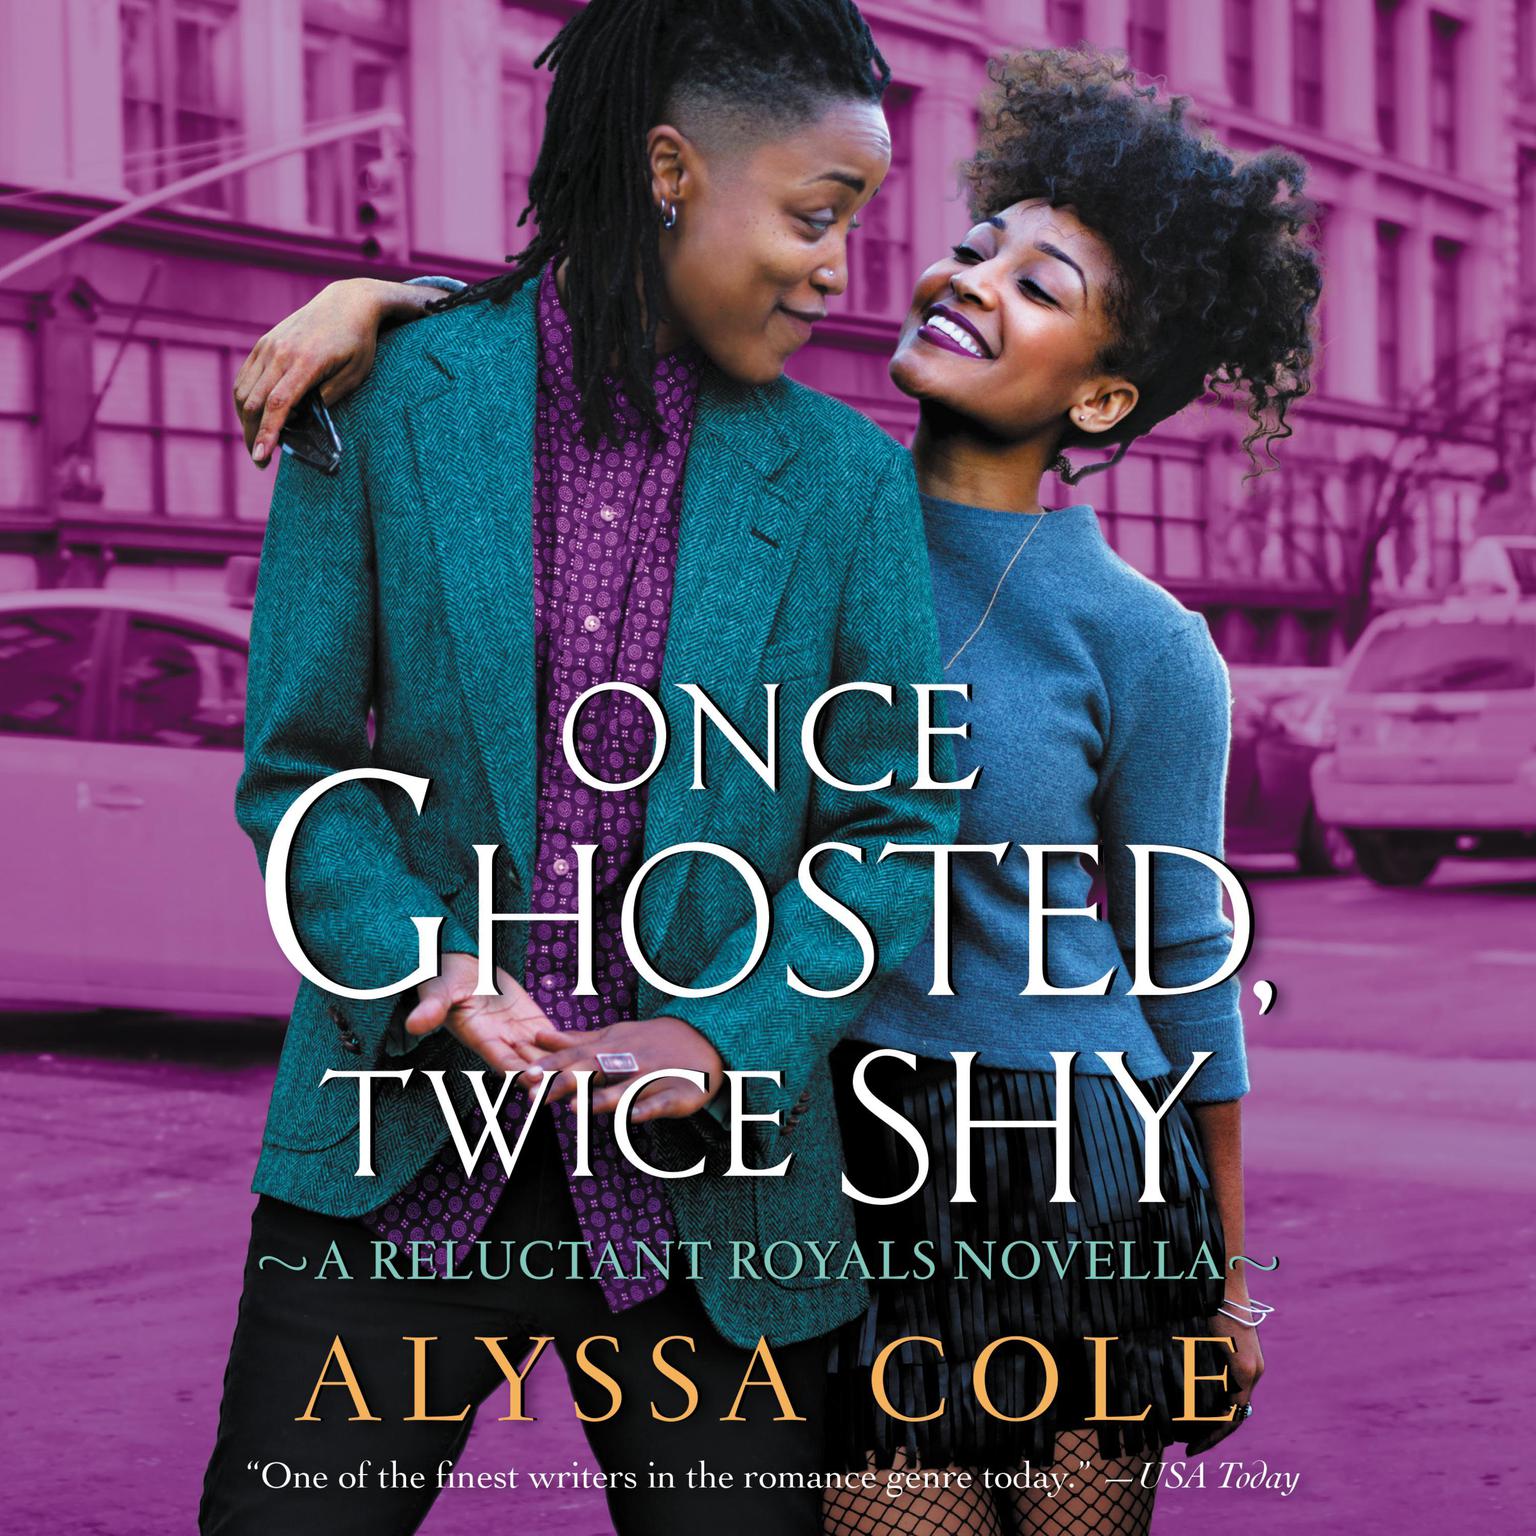 Alyssa Cole: Once Ghosted, Twice Shy (2019, HarperCollins Publishers)